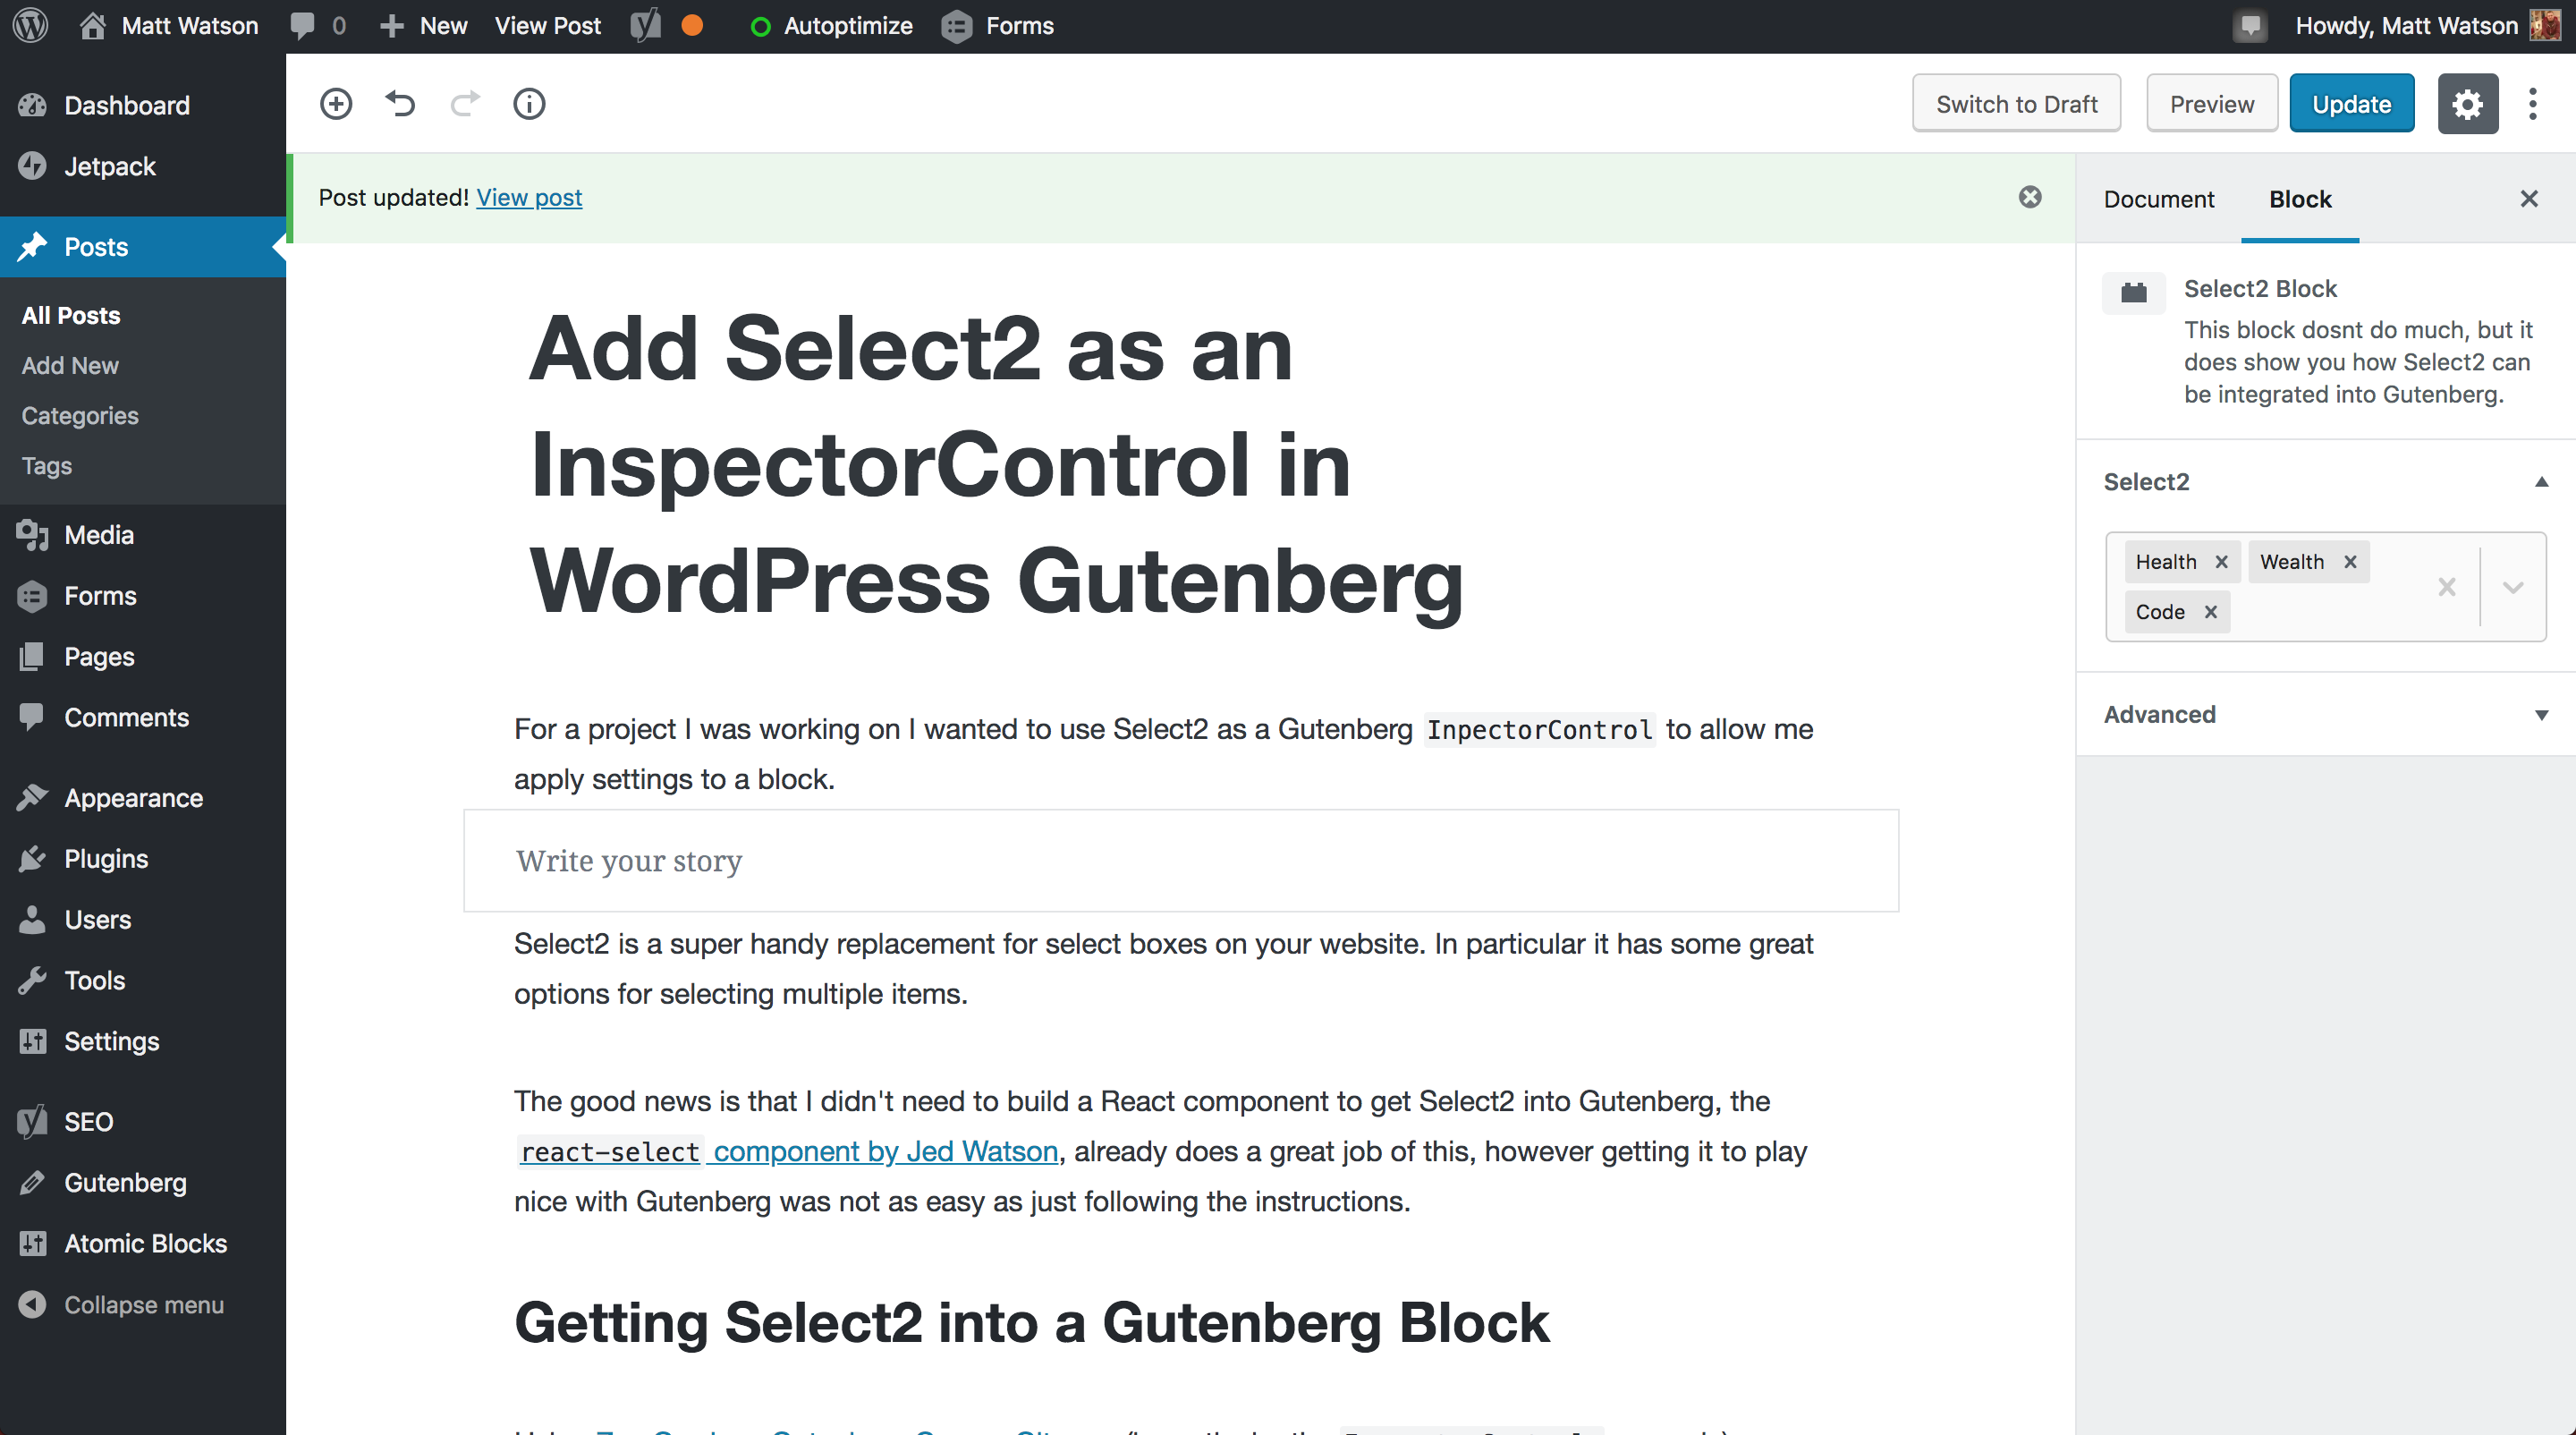 The finished product, Select2 in the WordPress Gutenberg InspectorControls